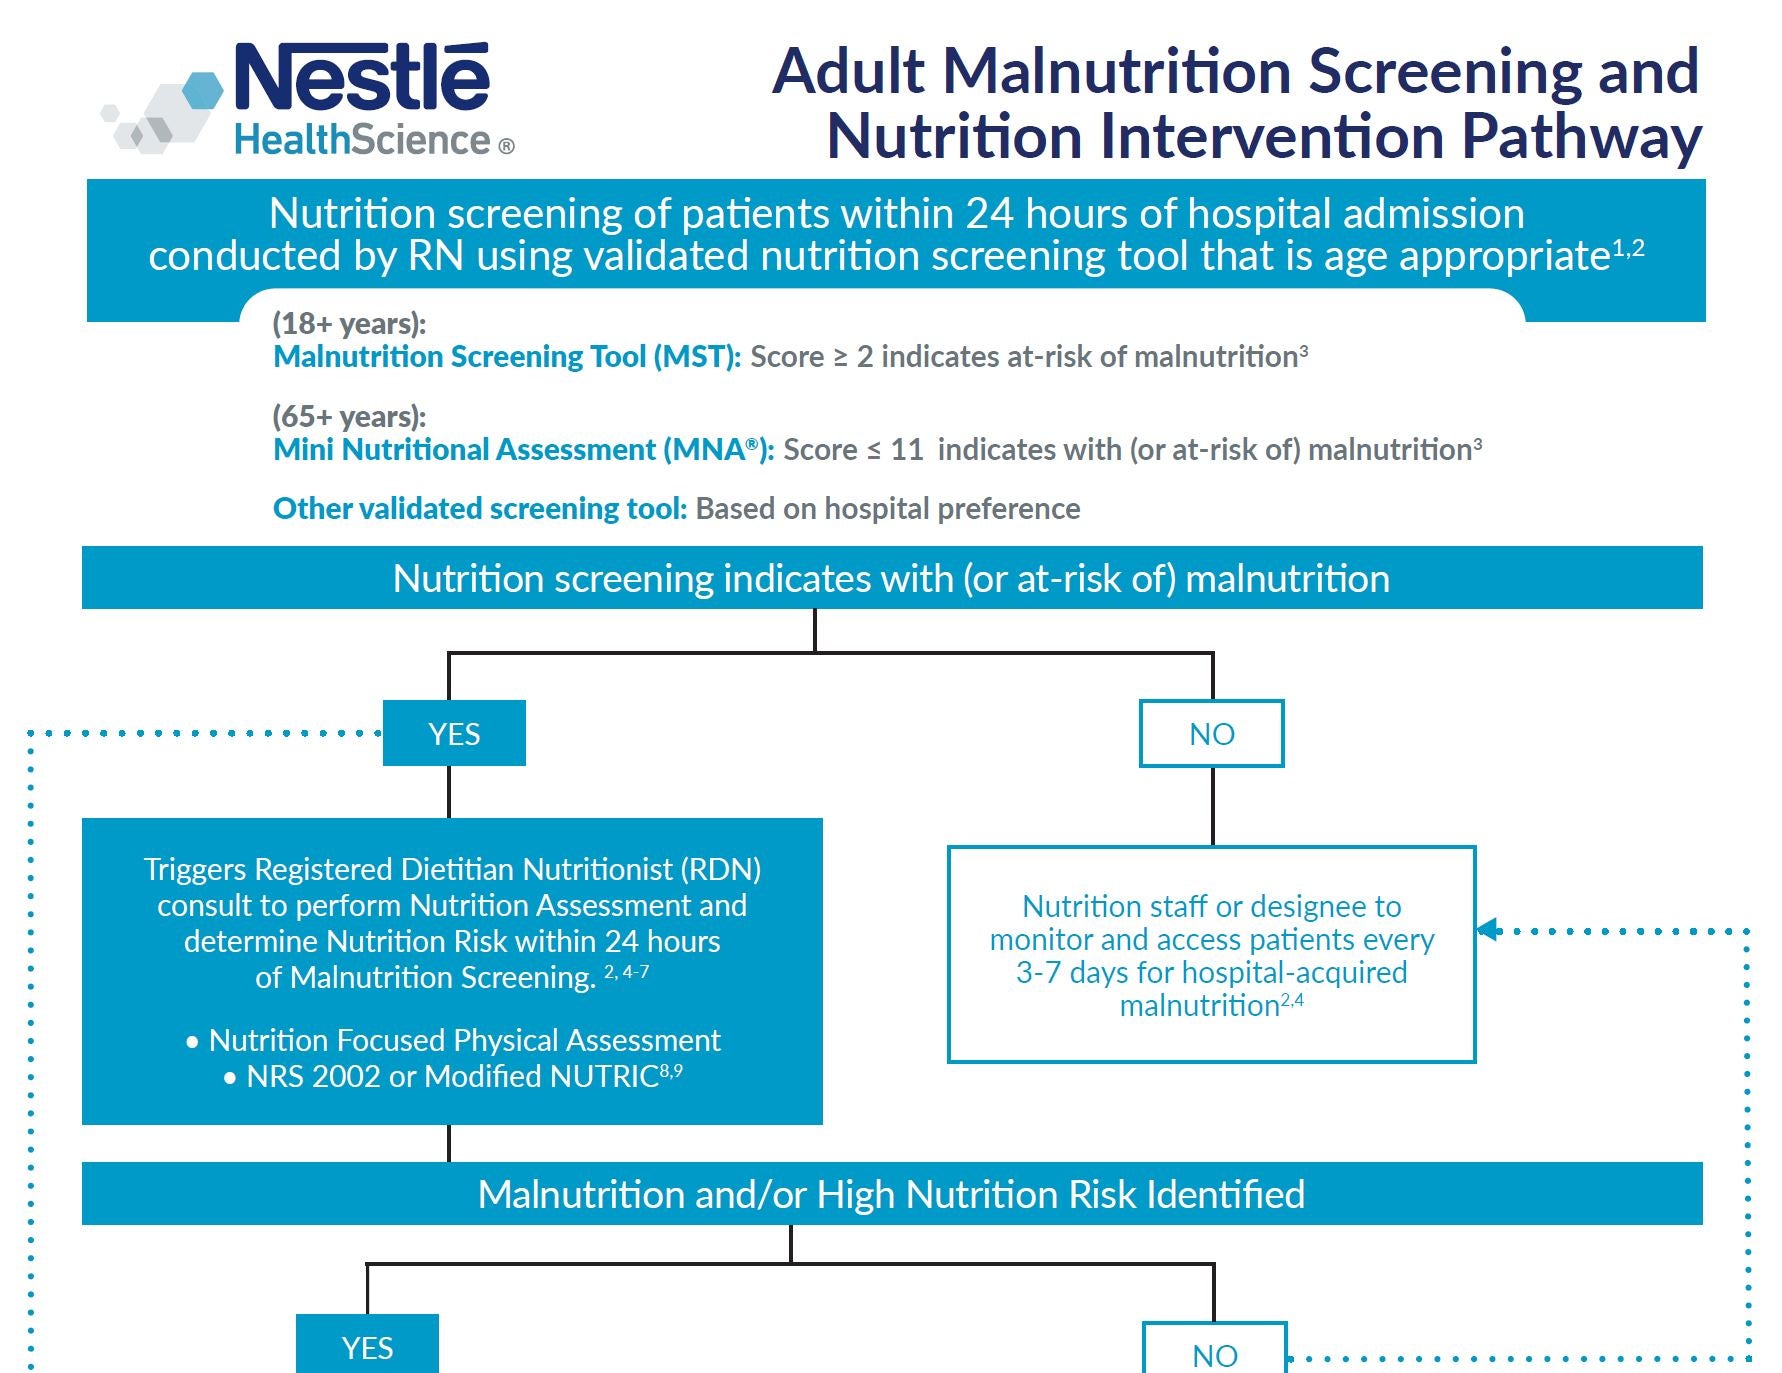 Adult Malnutrition Screening and Nutrition Intervention Pathway